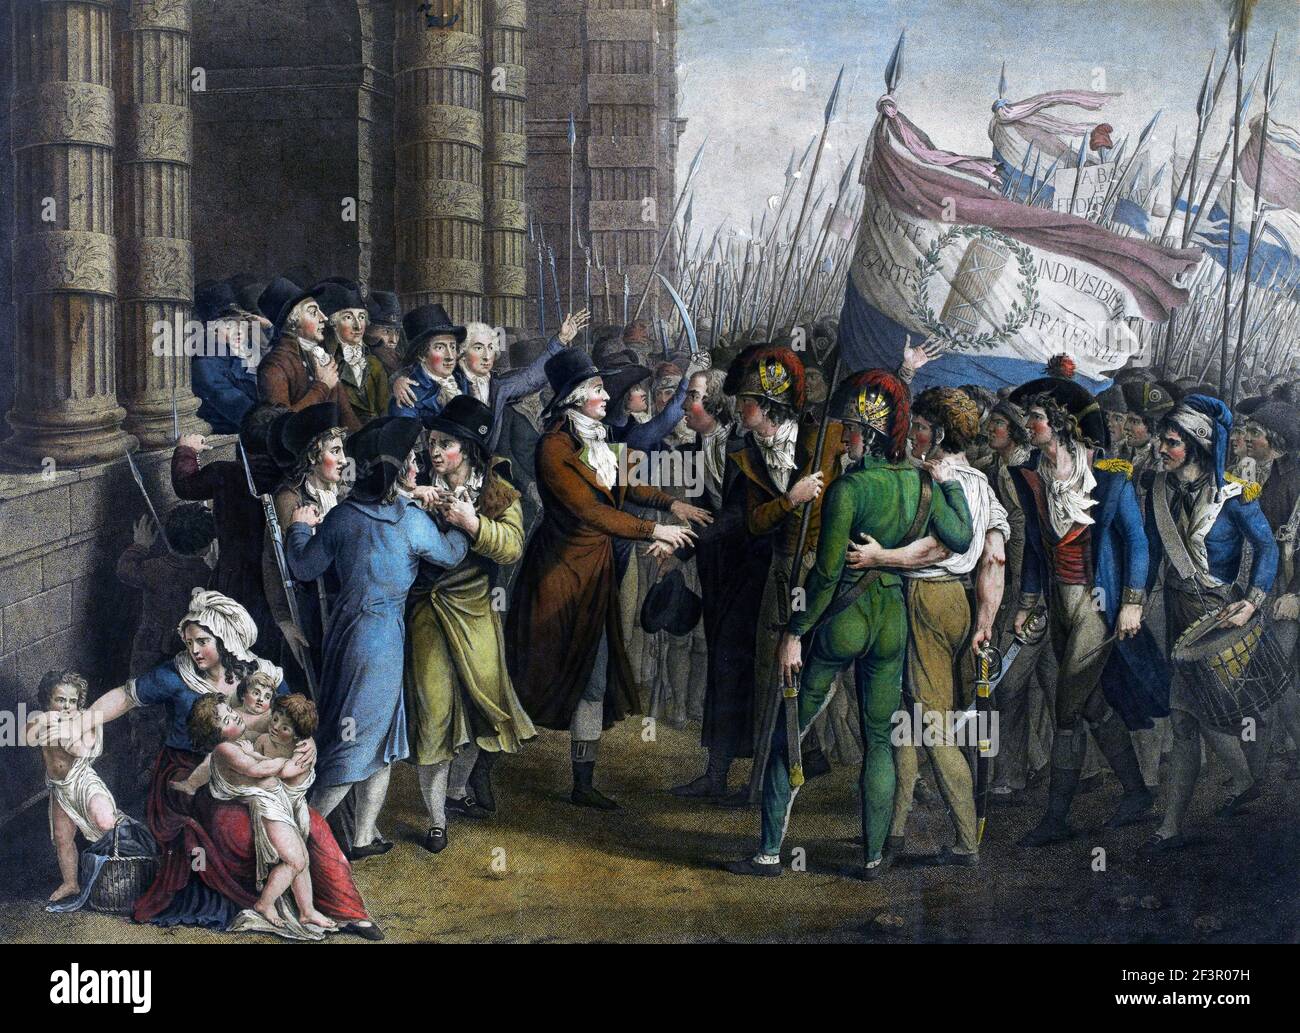 French Revolution. The uprising of the Parisian sans-culottes (common people) from 31 May to 2 June 1793. The scene takes place in front of the Deputies Chamber in the Tuileries. The depiction shows Marie-Jean Hérault de Séchelles and Pierre Victurnien Vergniaud. Engraving by Jean-Joseph-François Tassaert, c. 1800 Stock Photo